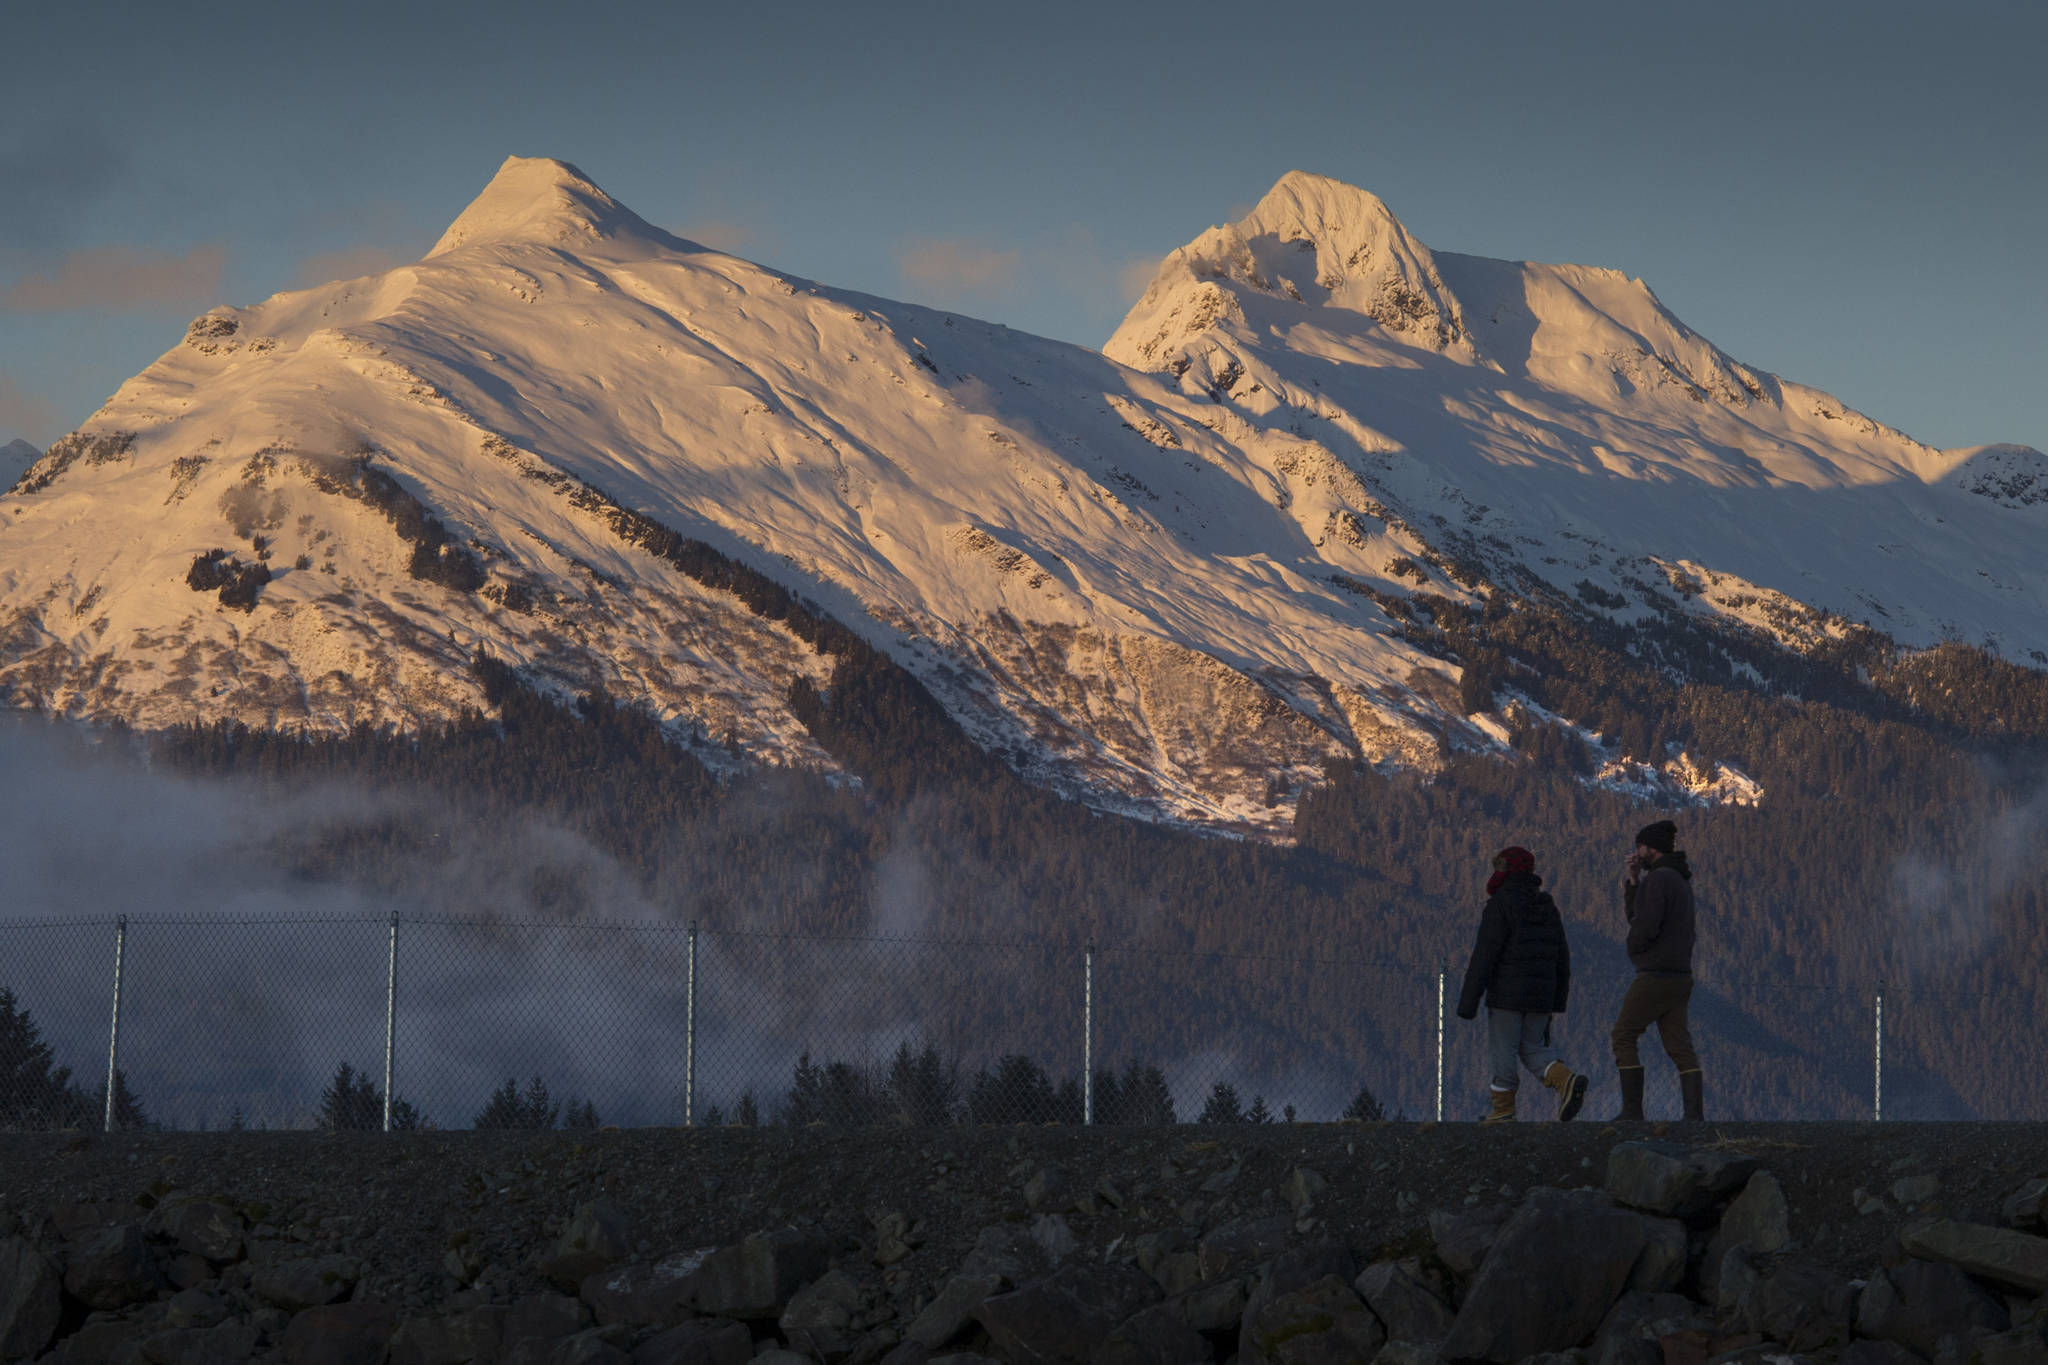 Warmer temperatures could cost Alaska up to $700 million